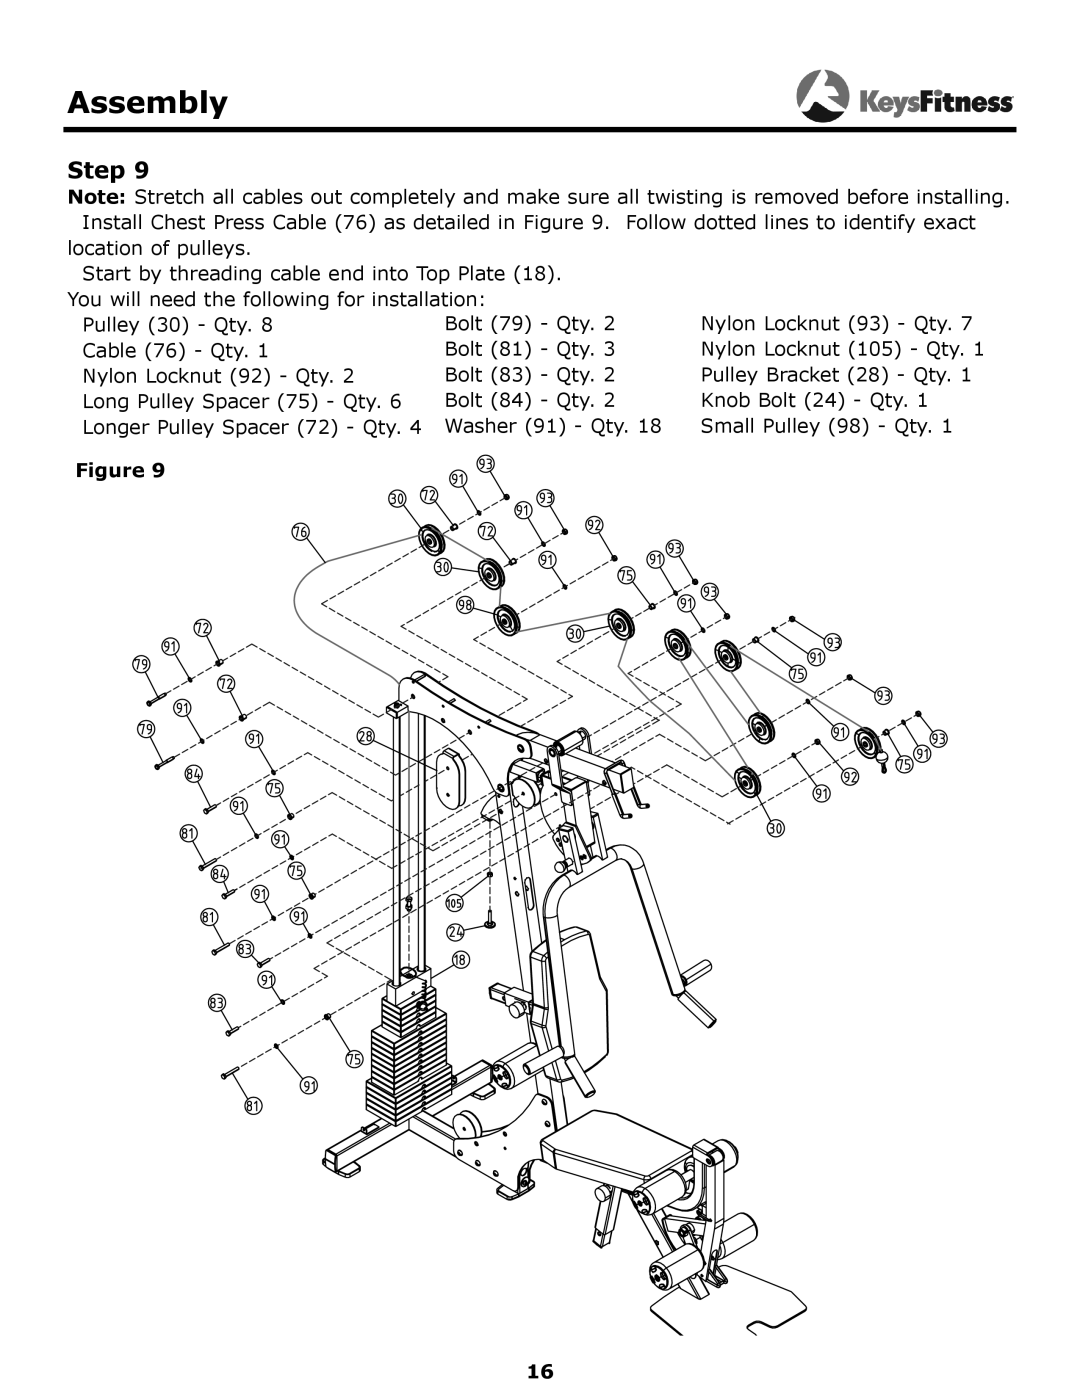 Keys Fitness KF-1560 owner manual Assembly, Step, location of pulleys 